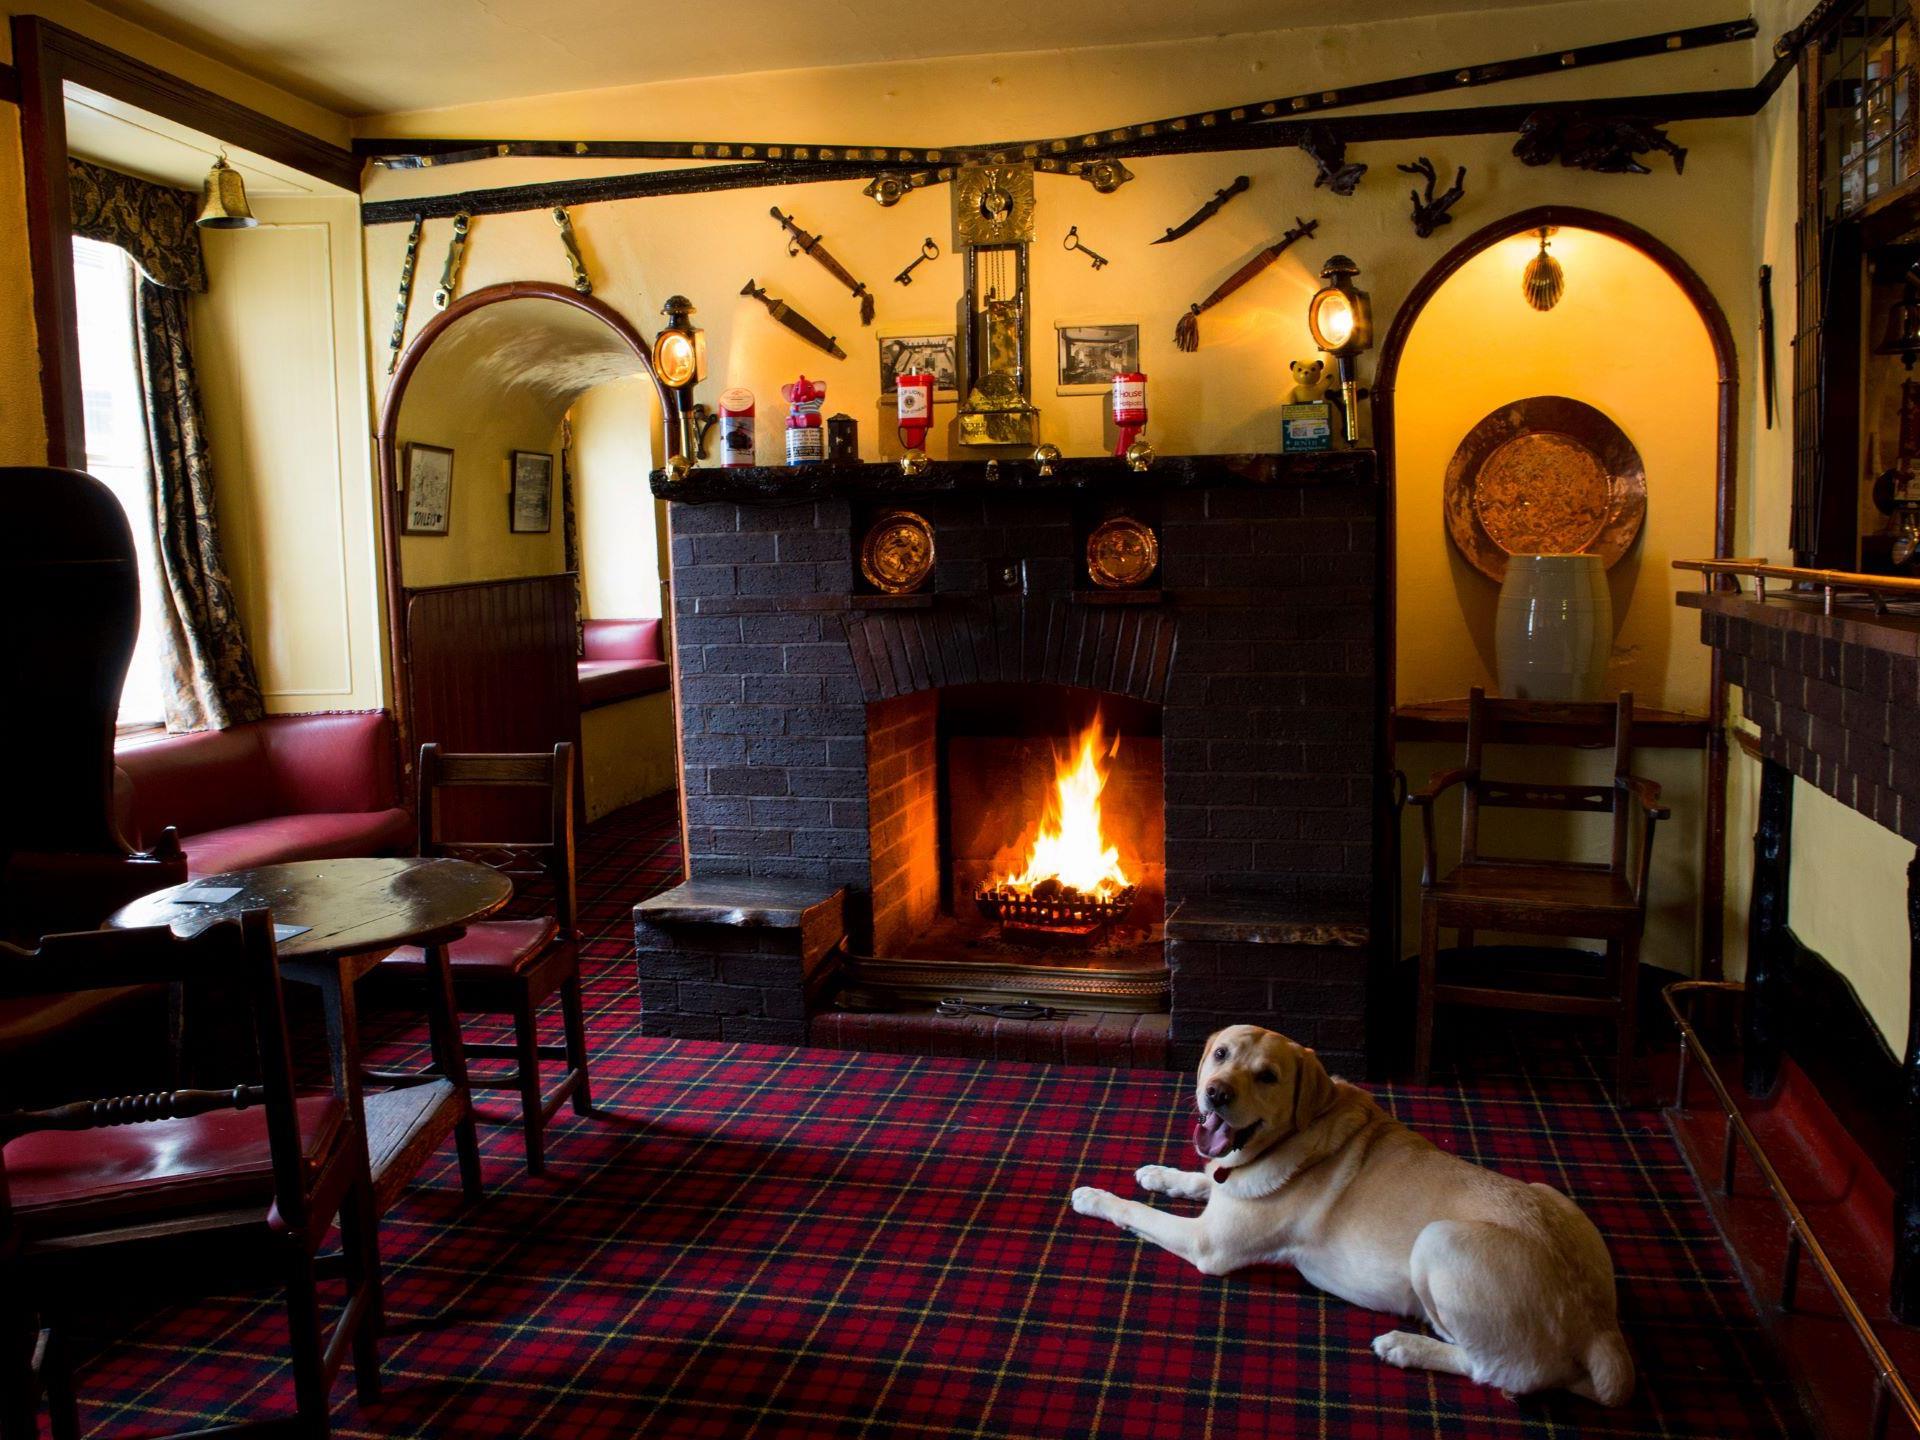 Fireplace (and dog) in the bar